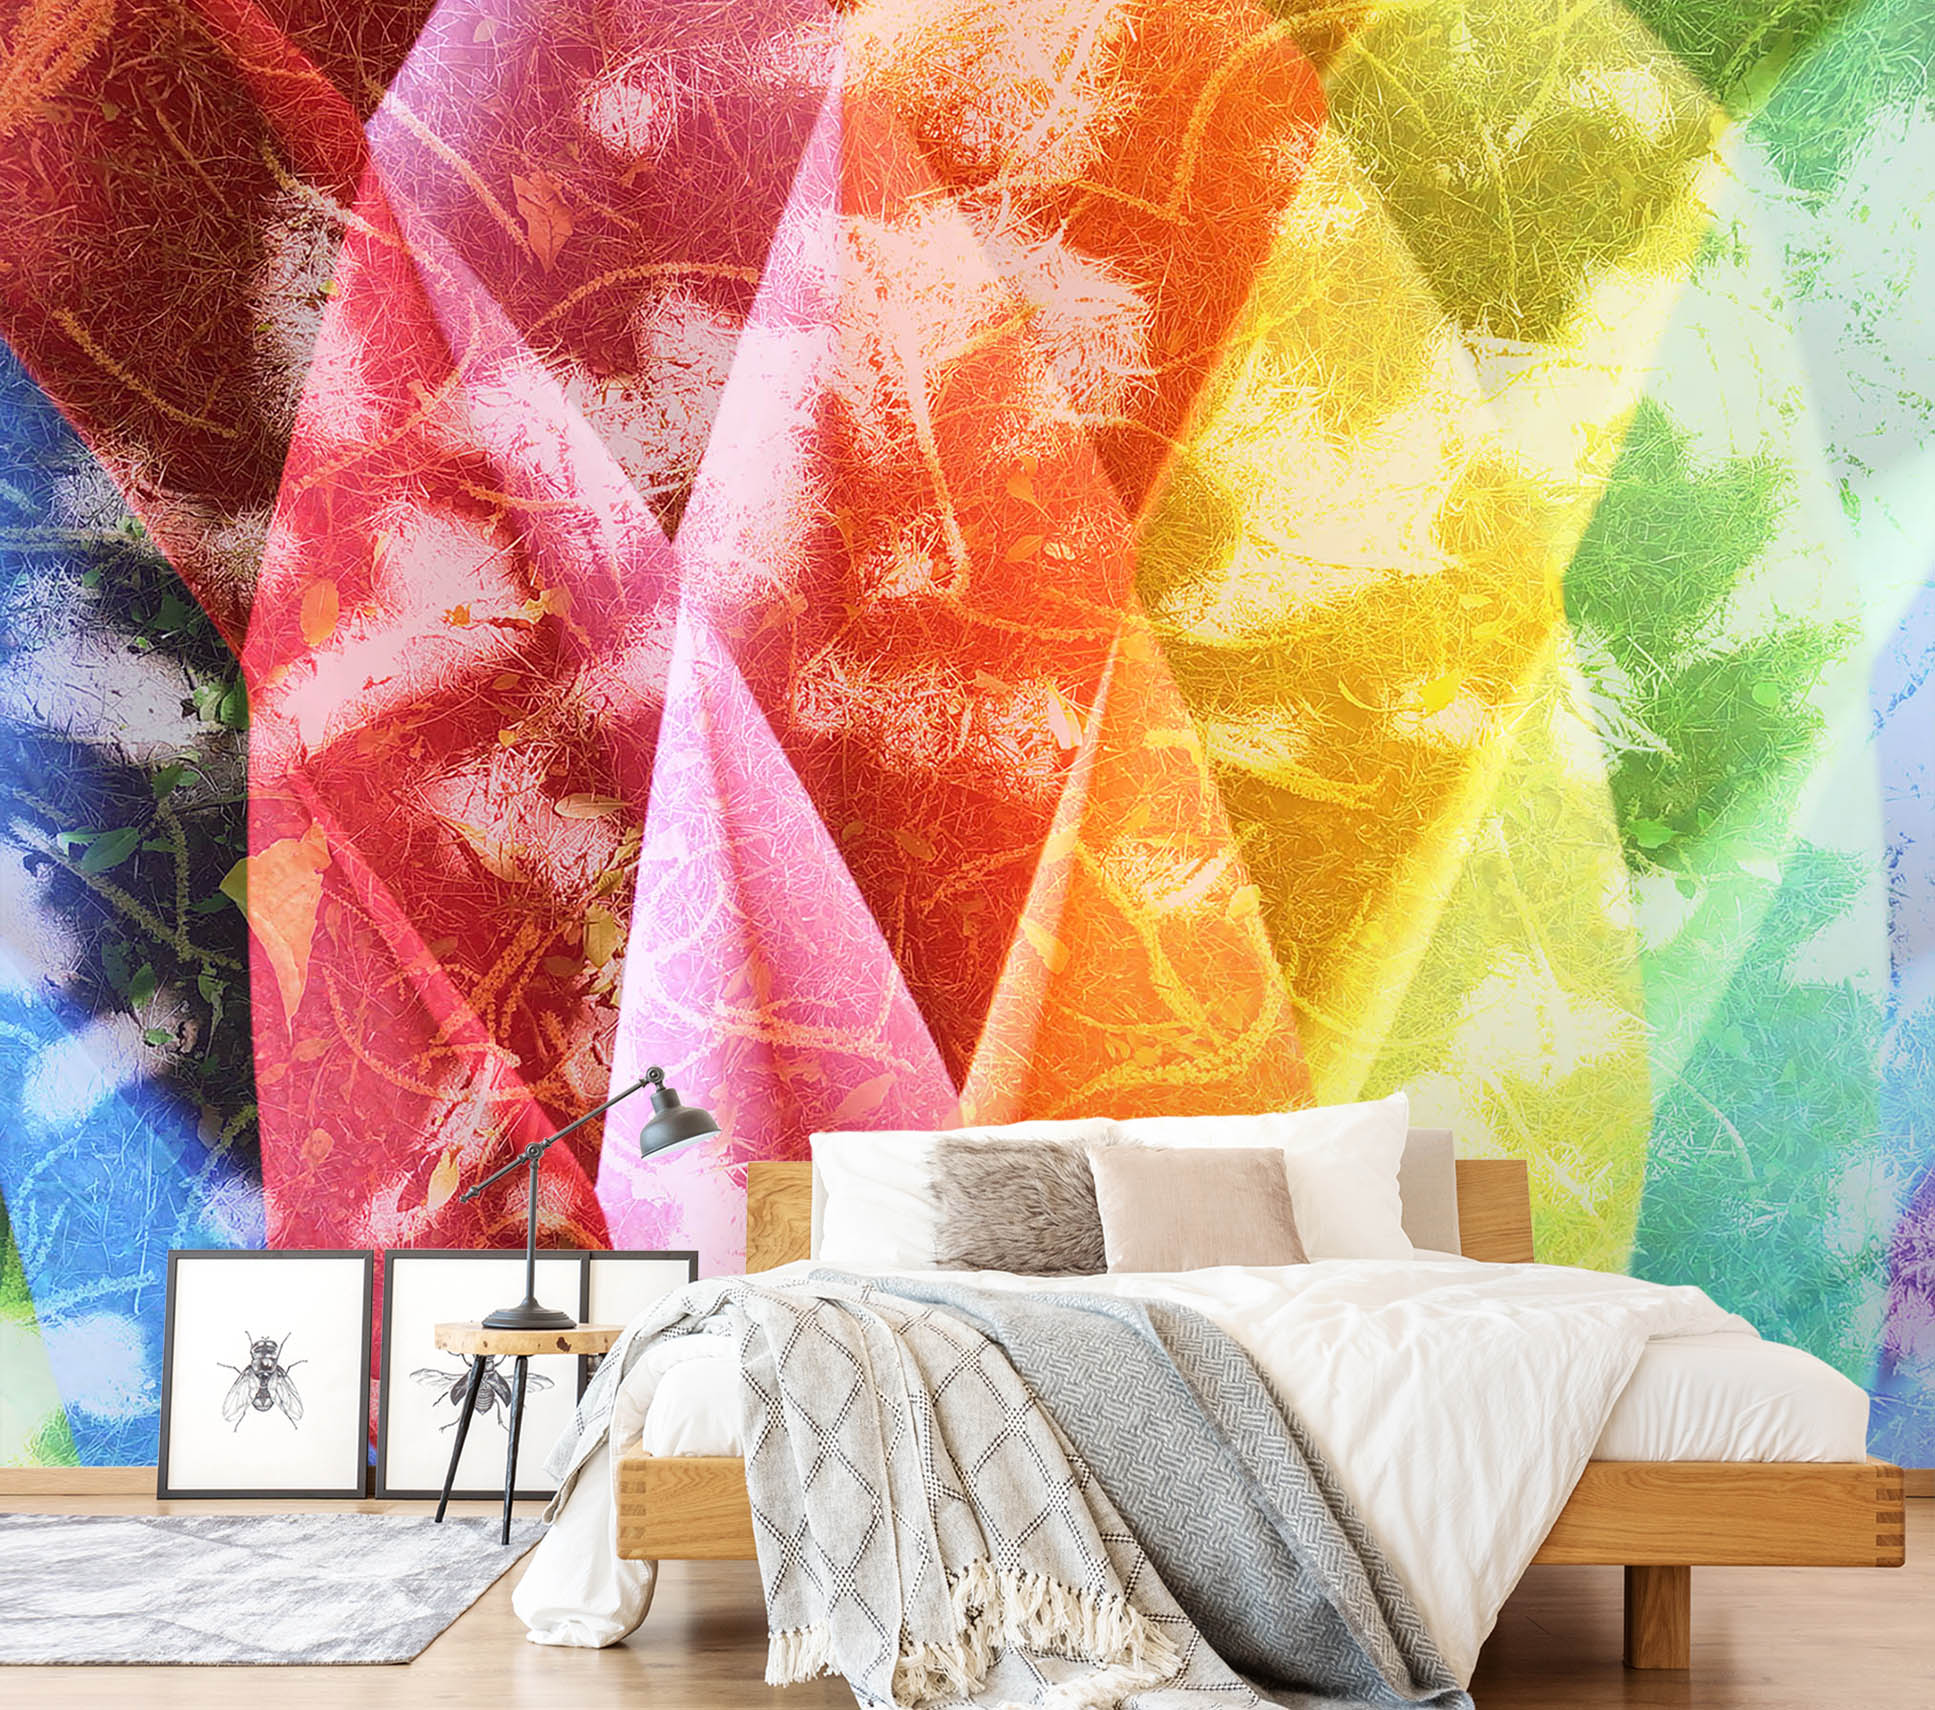 3D Color Cone 71084 Shandra Smith Wall Mural Wall Murals